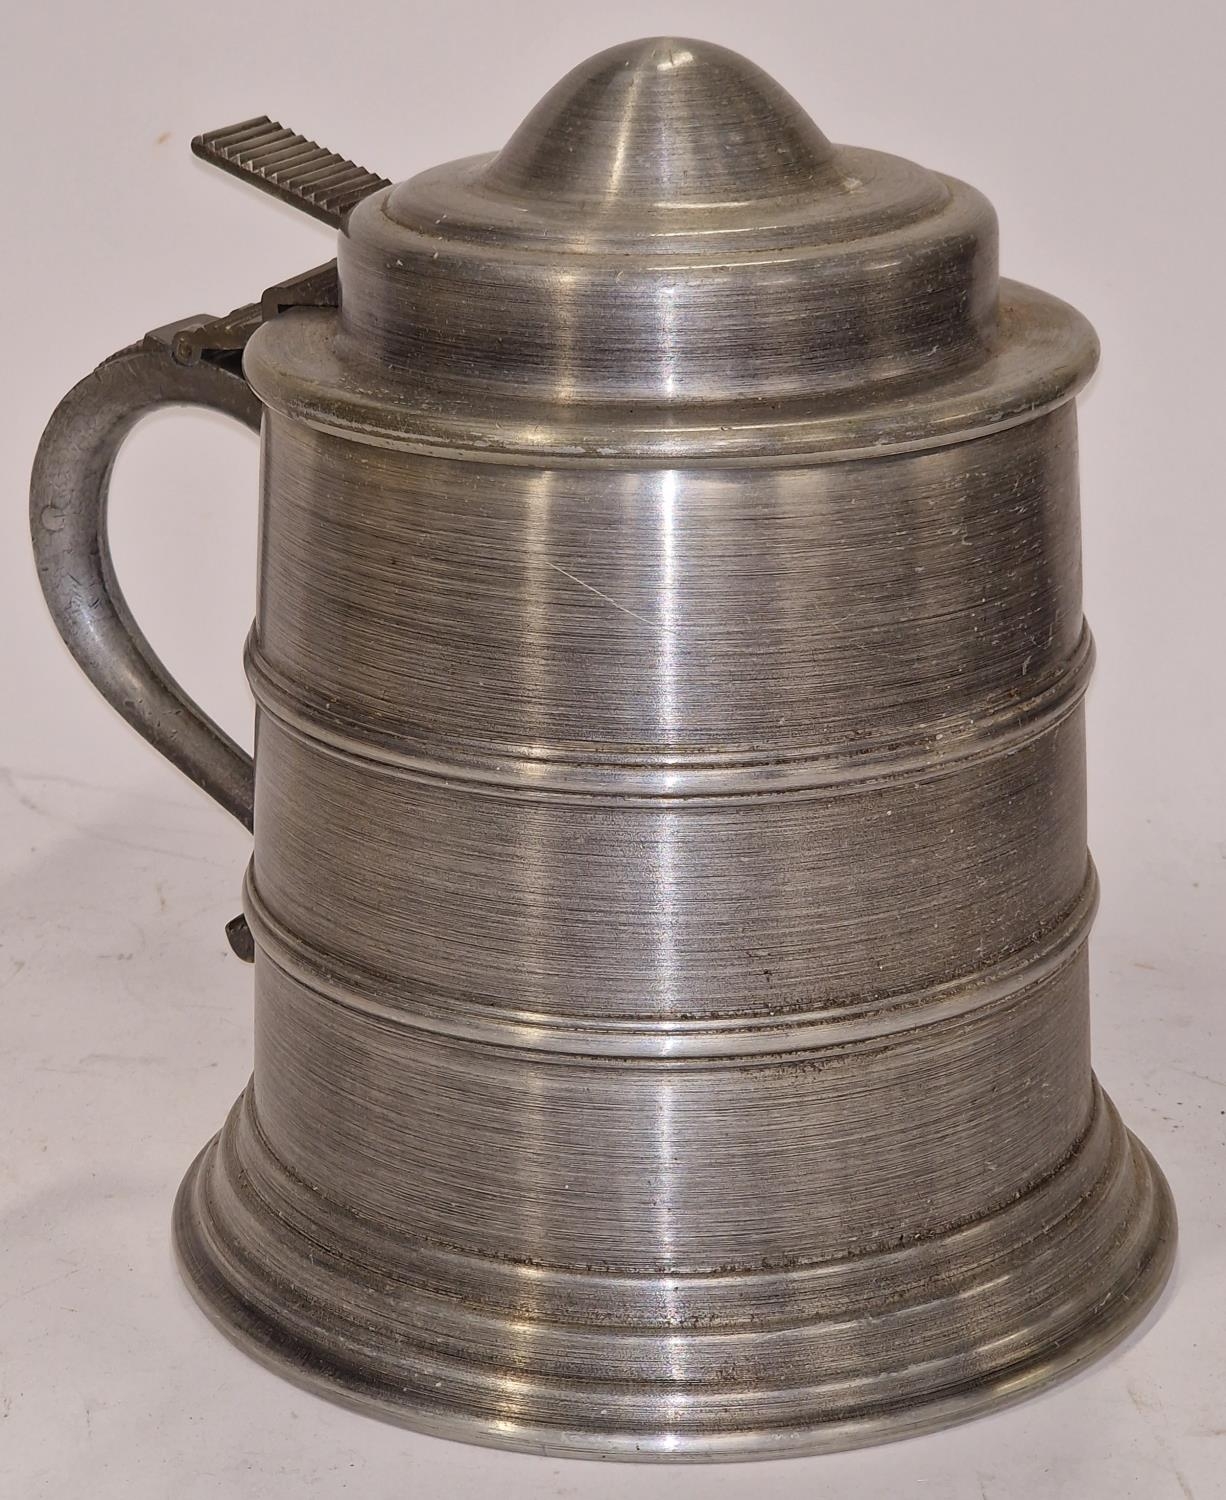 Vintage novelty ice bucket in the form of a large tankard with lid.